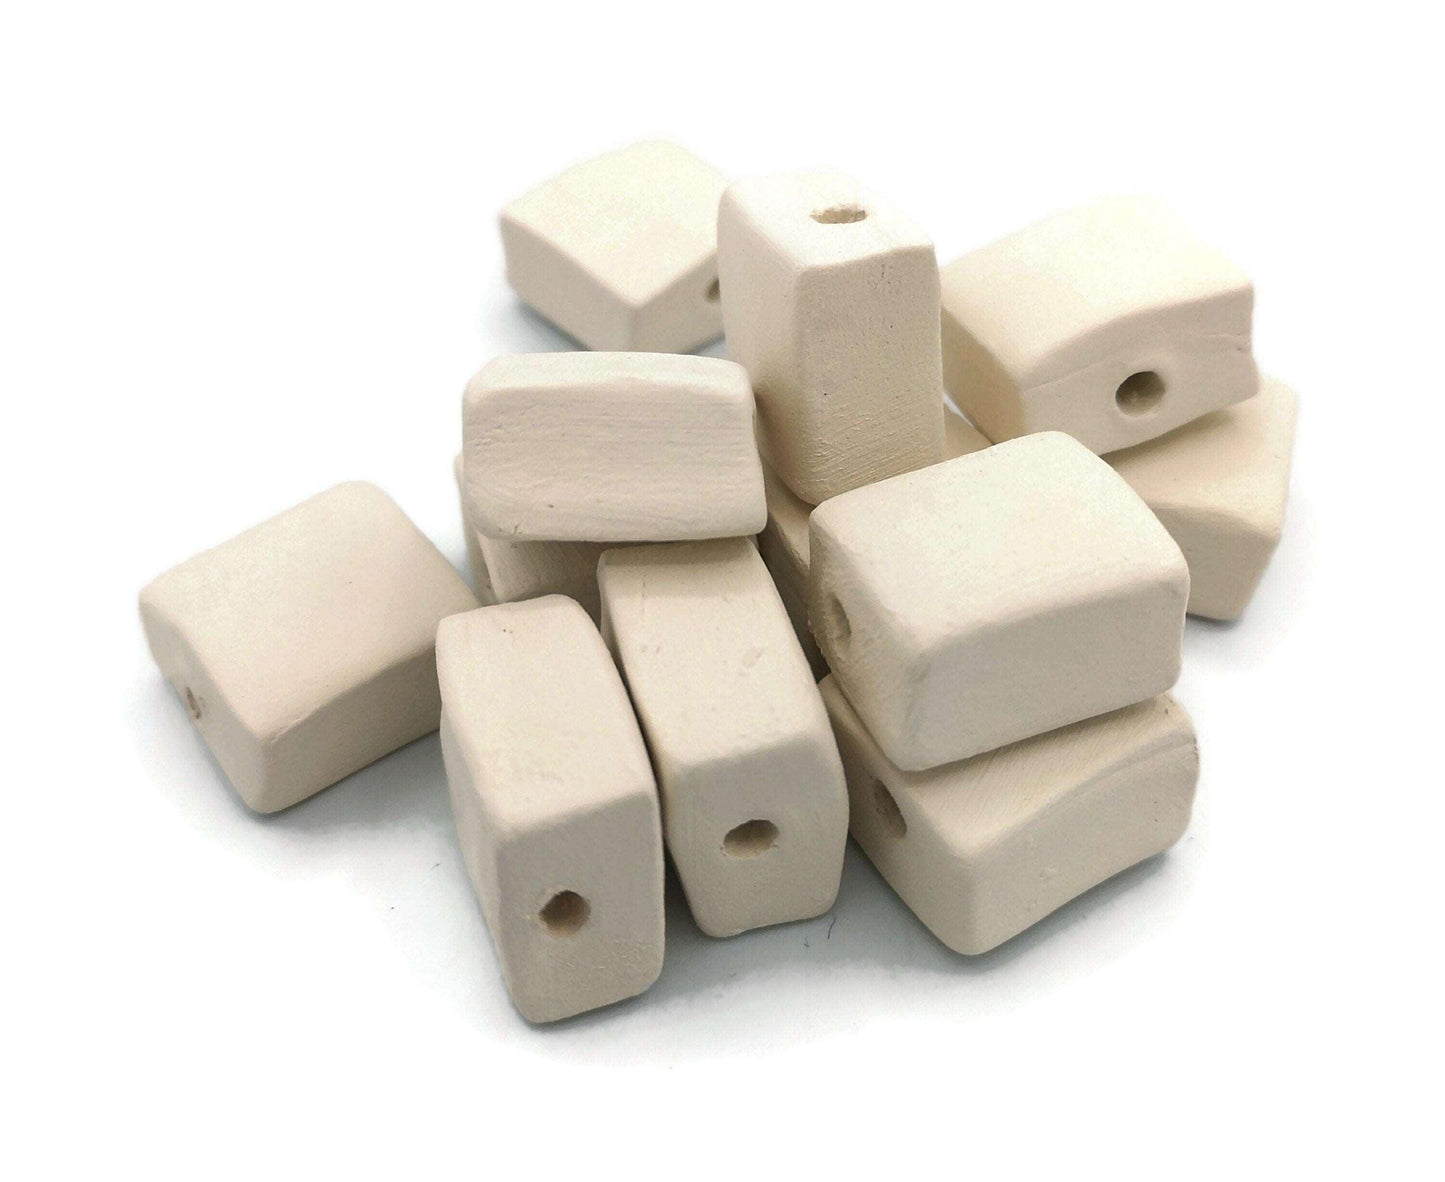 12Pc SquareHandmade Ceramic Bisque Beads For Jewelry Making, Craft Kits For Adults, Unpainted Macrame Beads Ready To Paint, Best Seller 2023